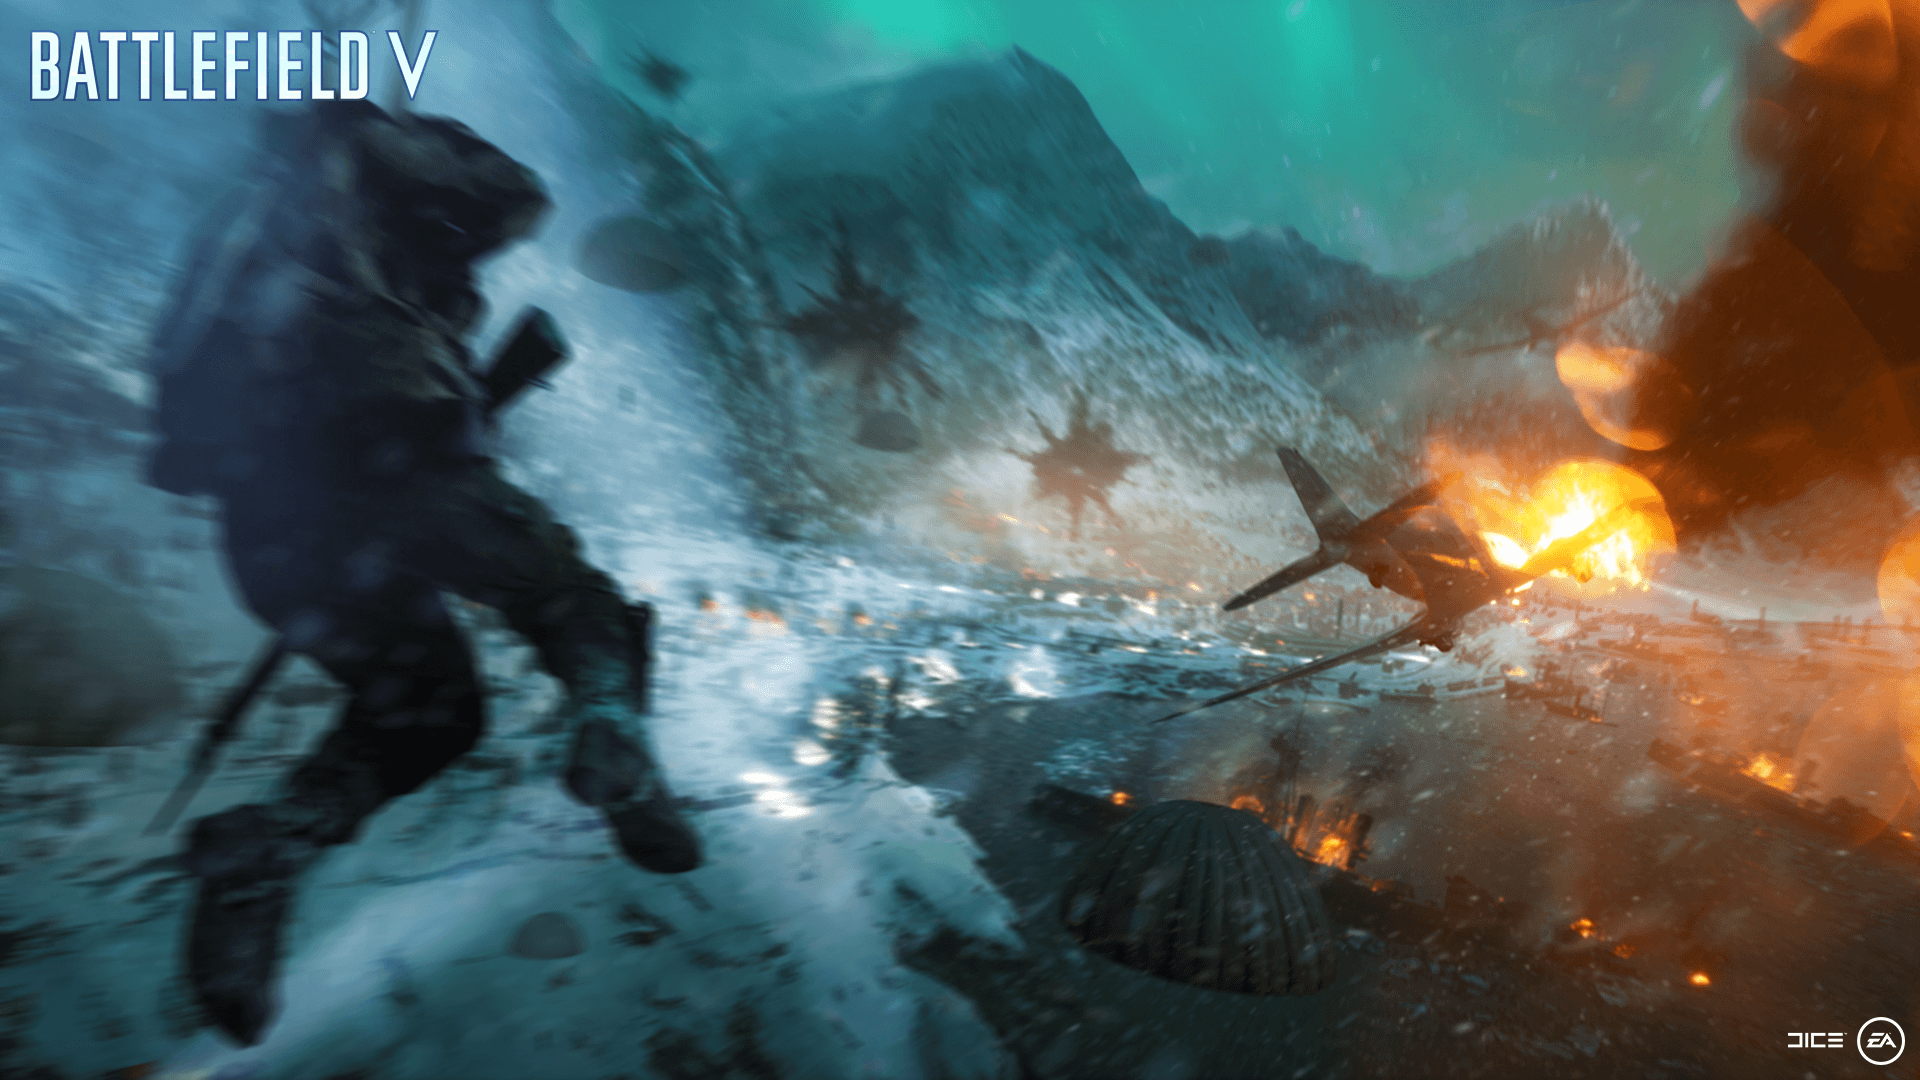 DICE: Battlefield V Demo was Running at “Rock Solid” 60fps in 1080p